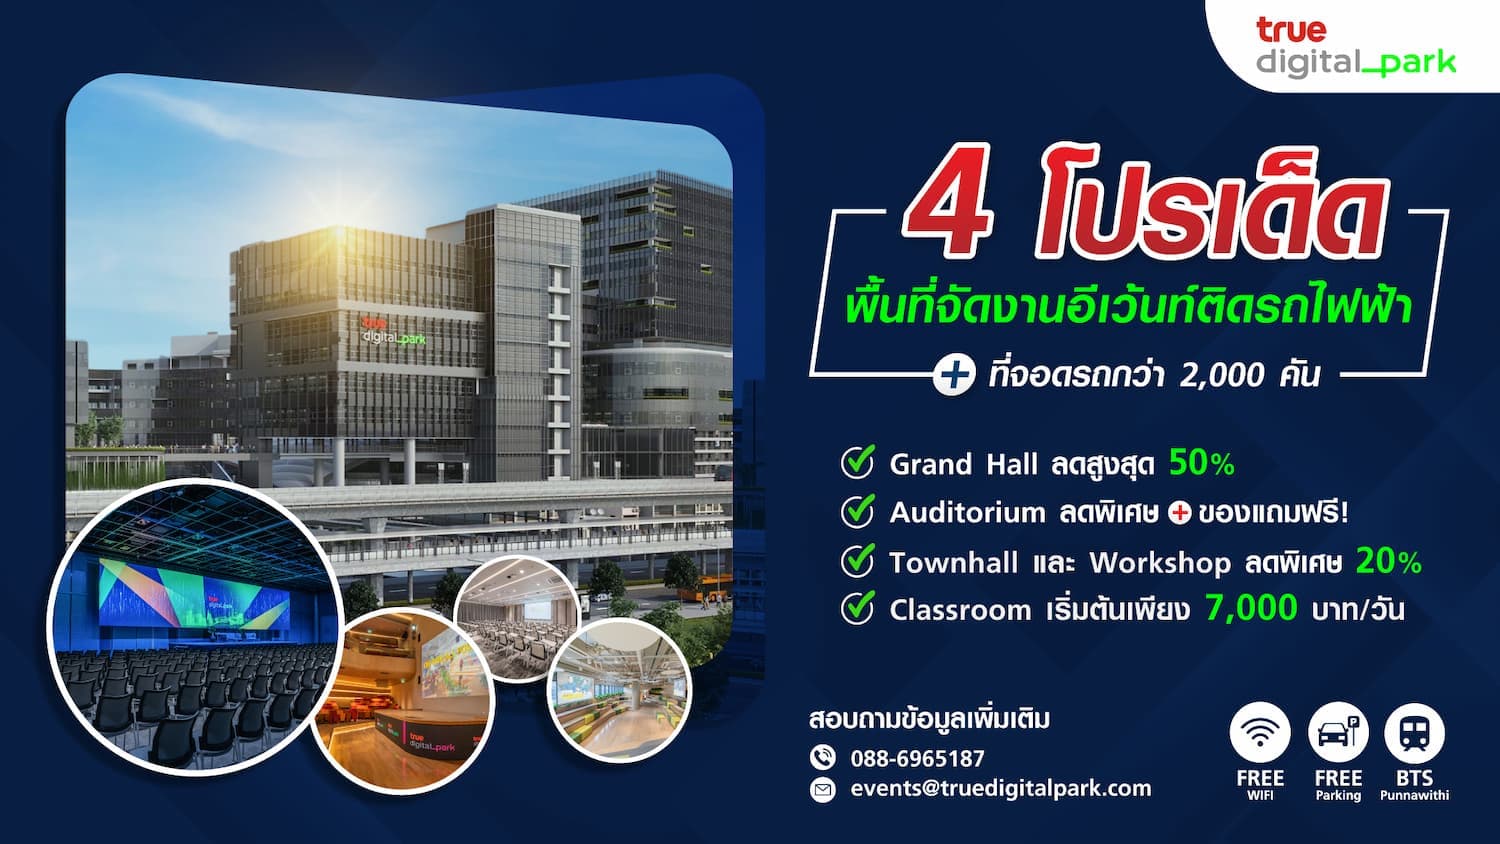 Great promotions for event space rental at True Digital Park, near Punnawithi BTS station